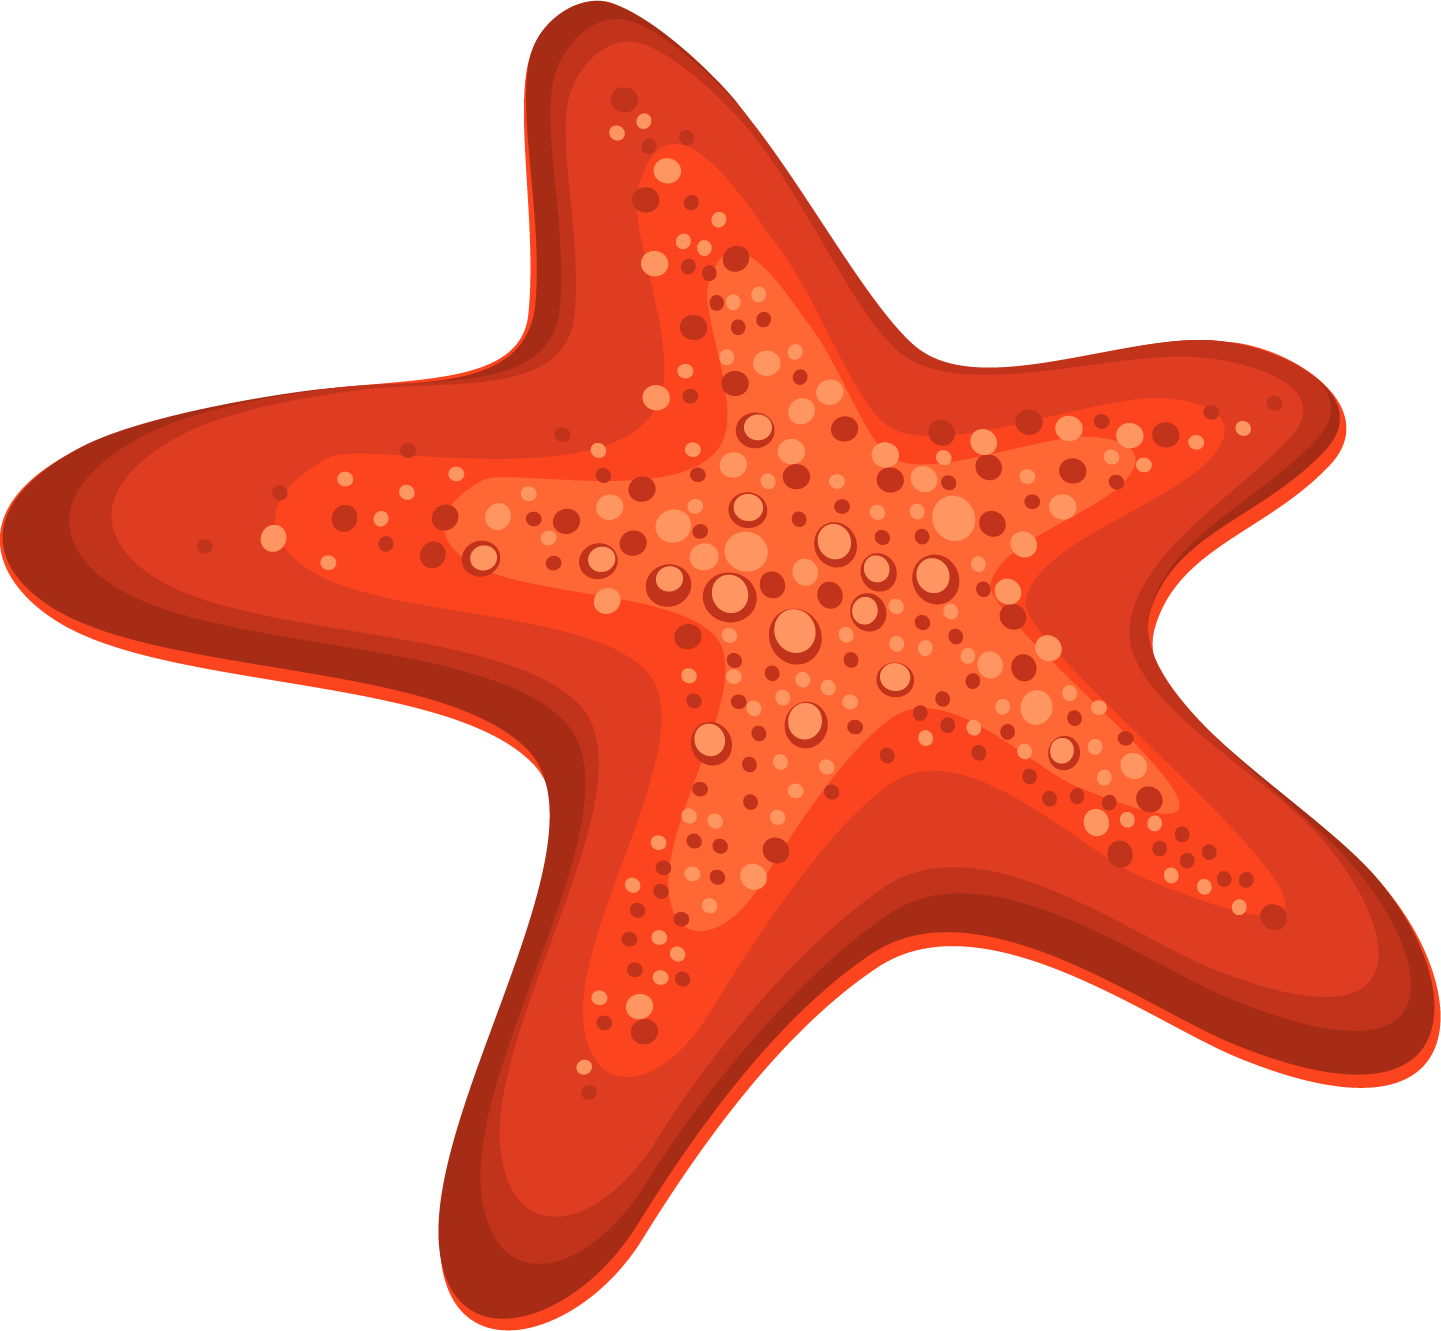 A Red Starfish With Bubbles